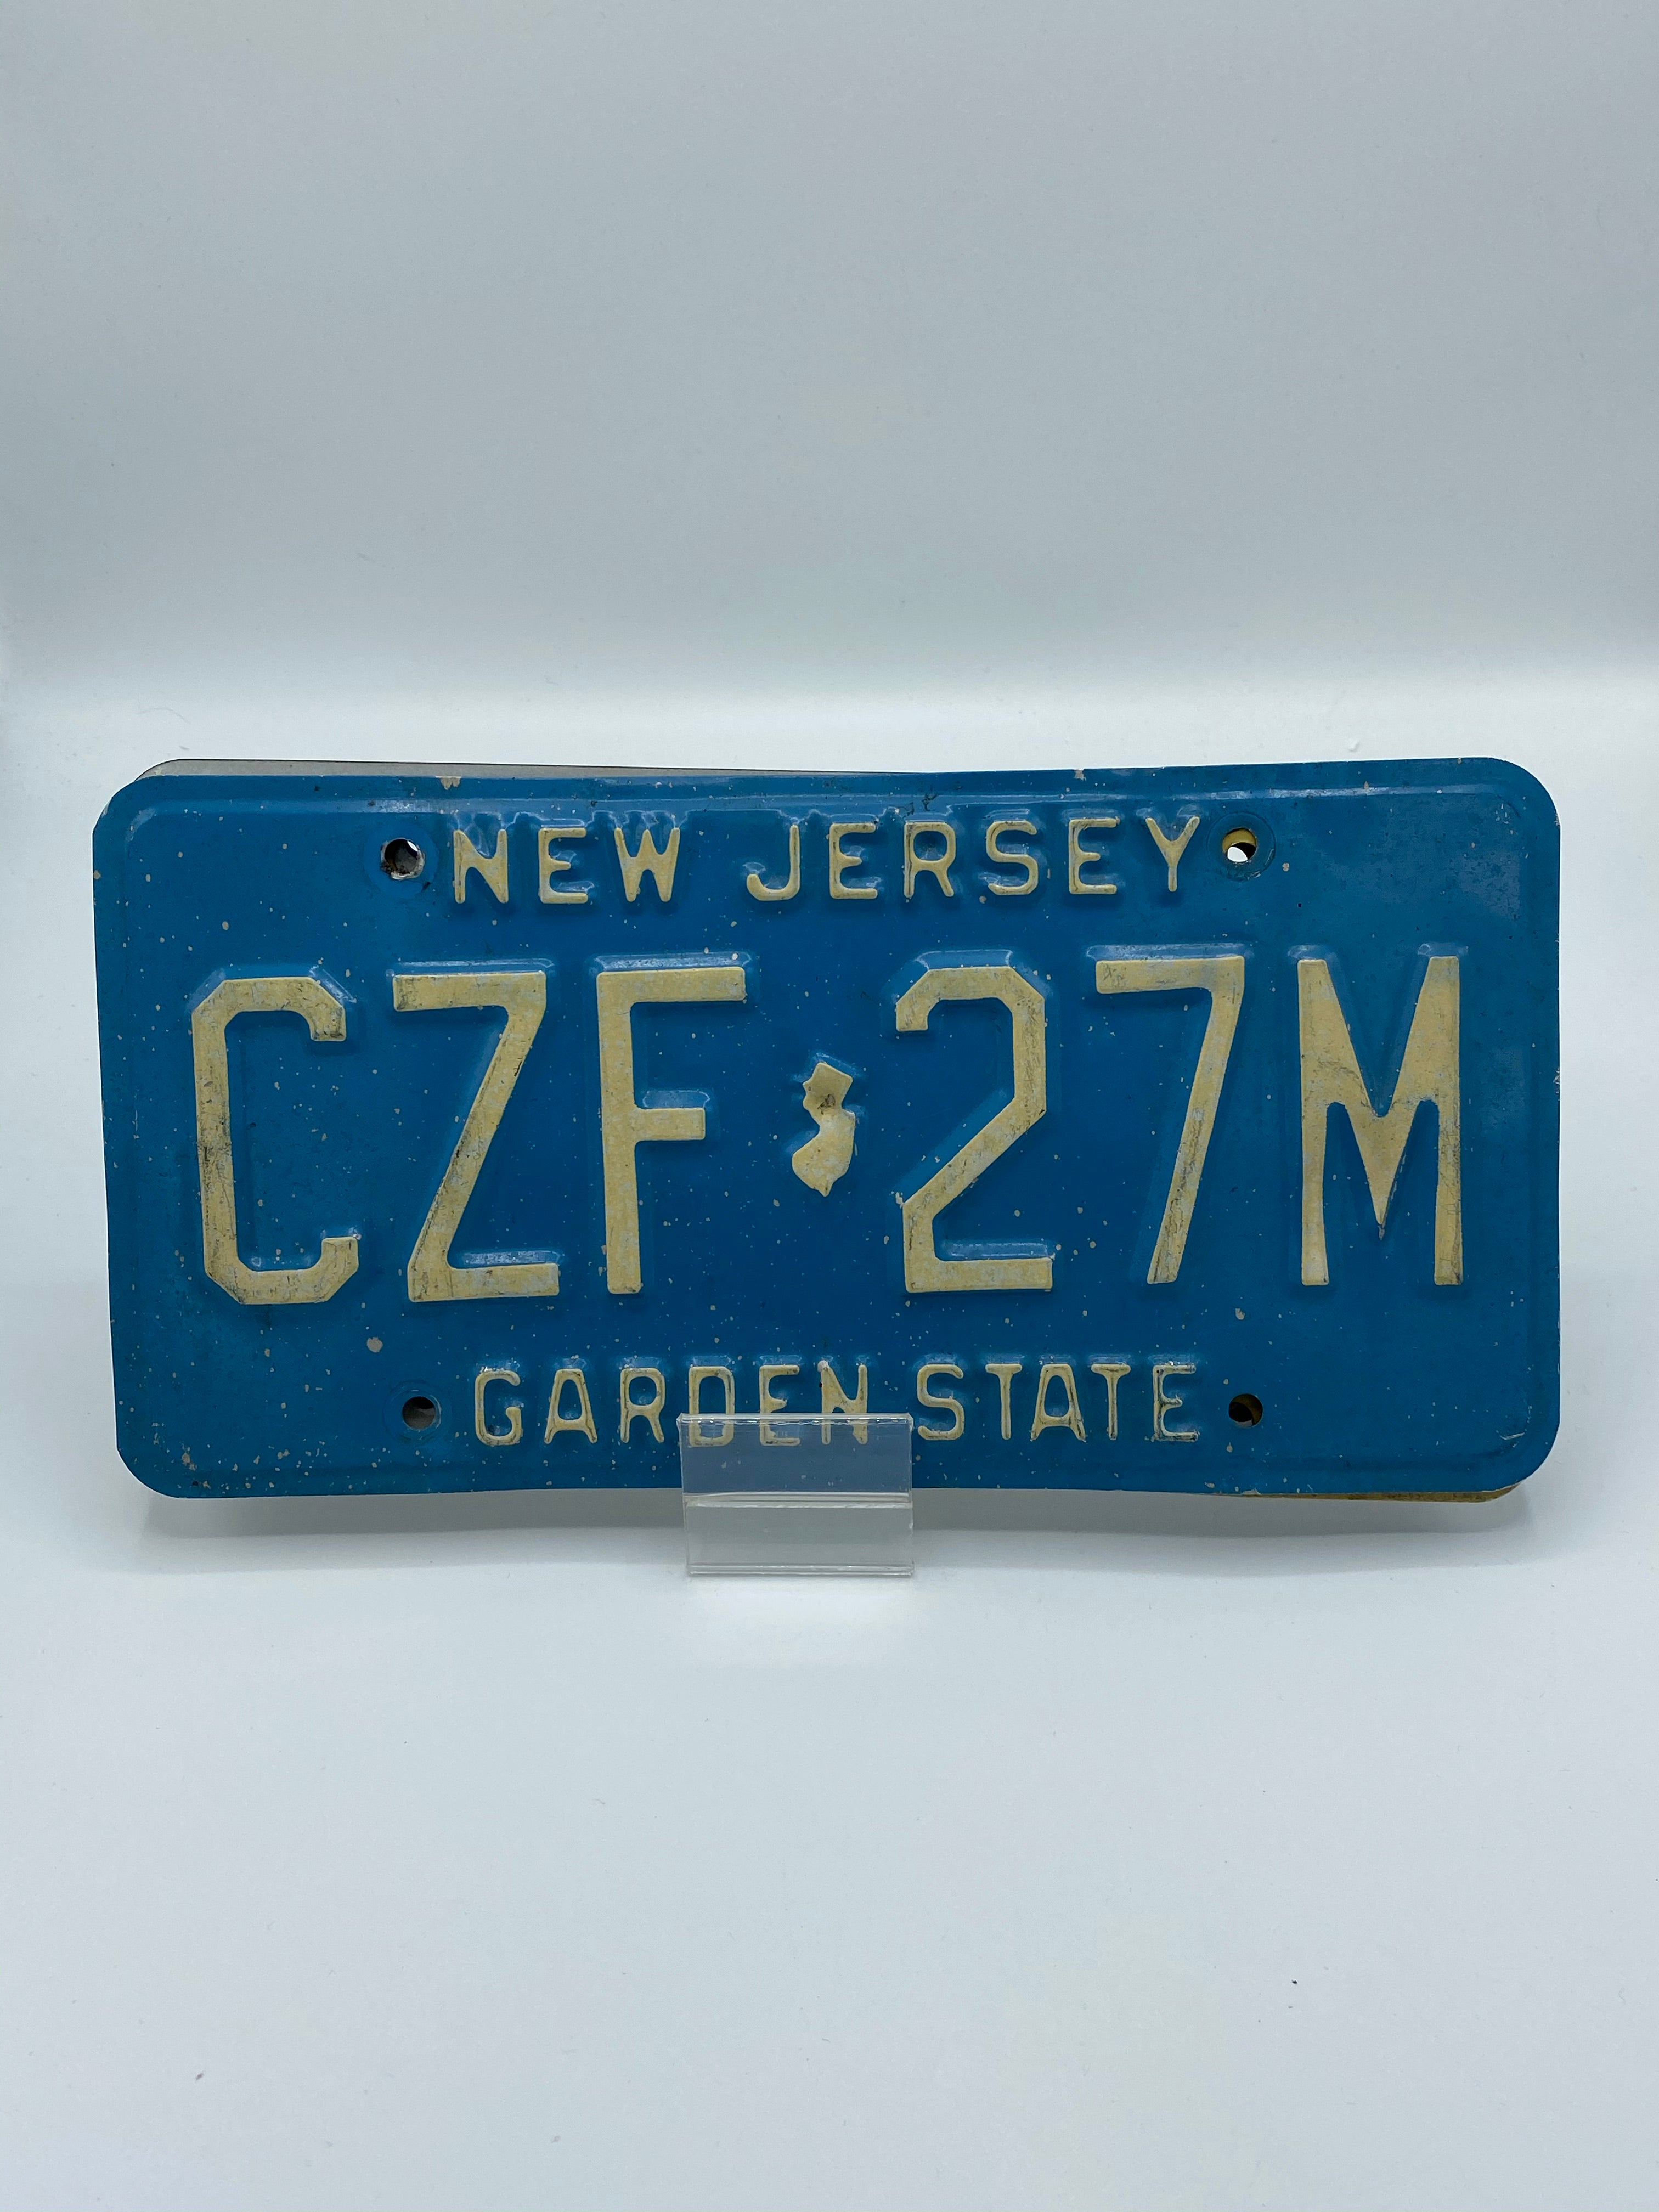 New Jersey License Plate